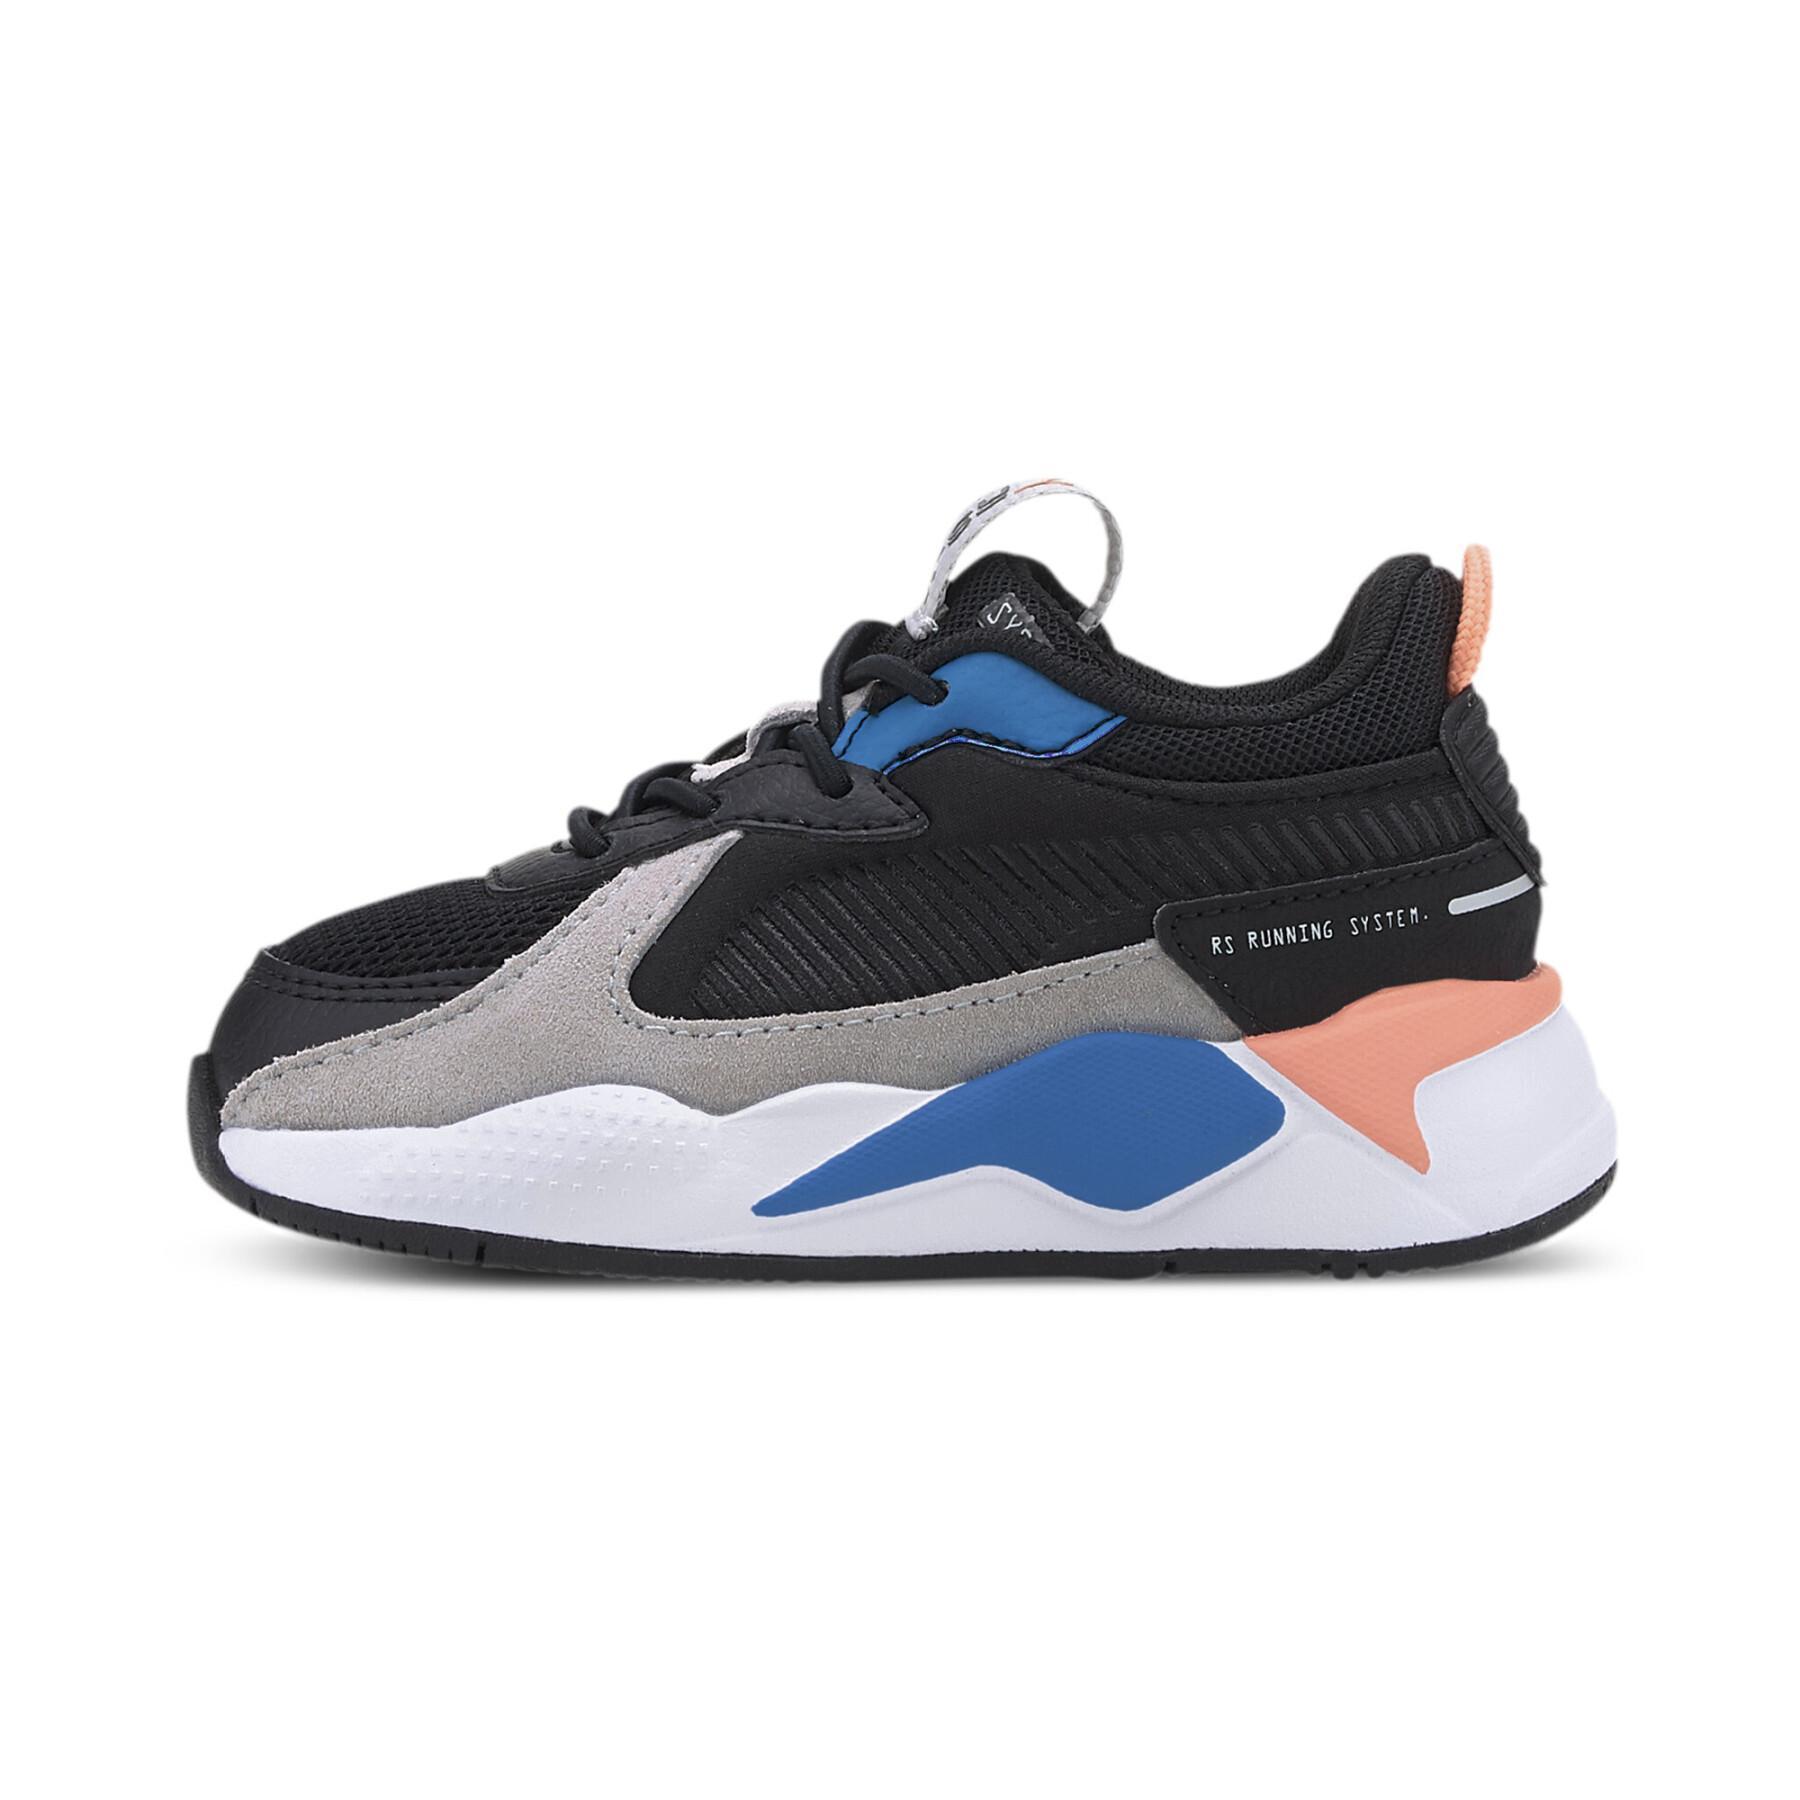 Baby sneakers Puma RS-X Monday AC